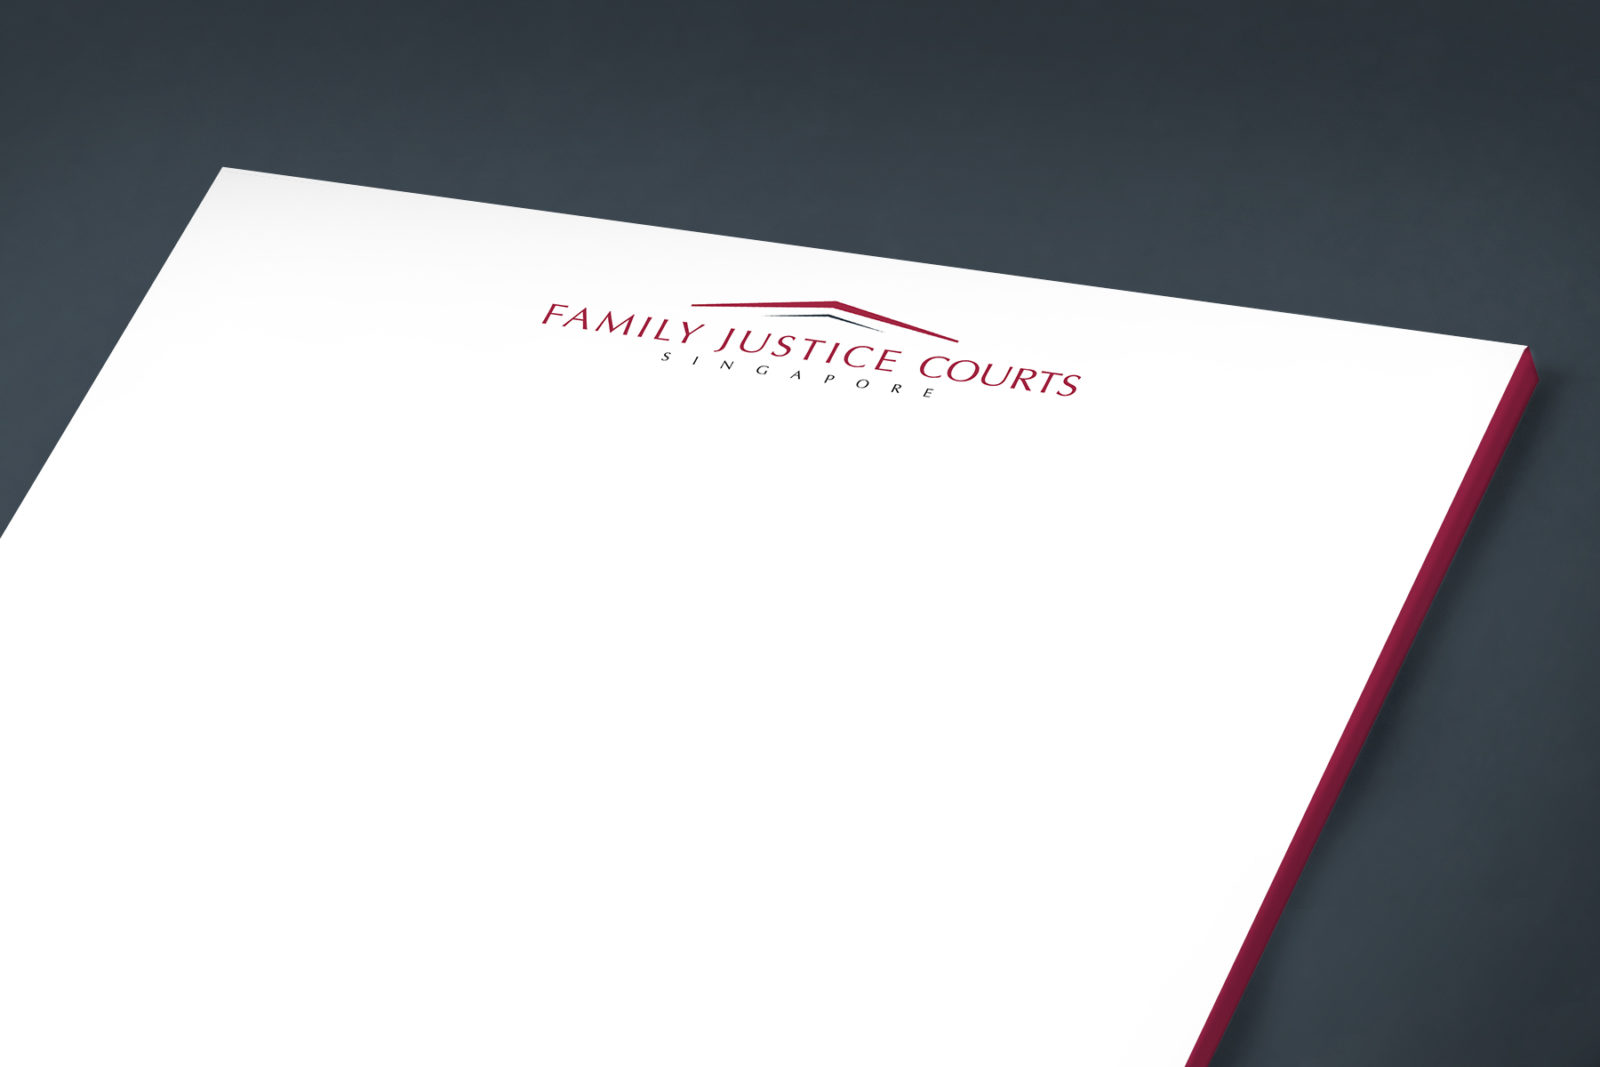 The Family Justice Courts of Singapore – Letter Head Close Up